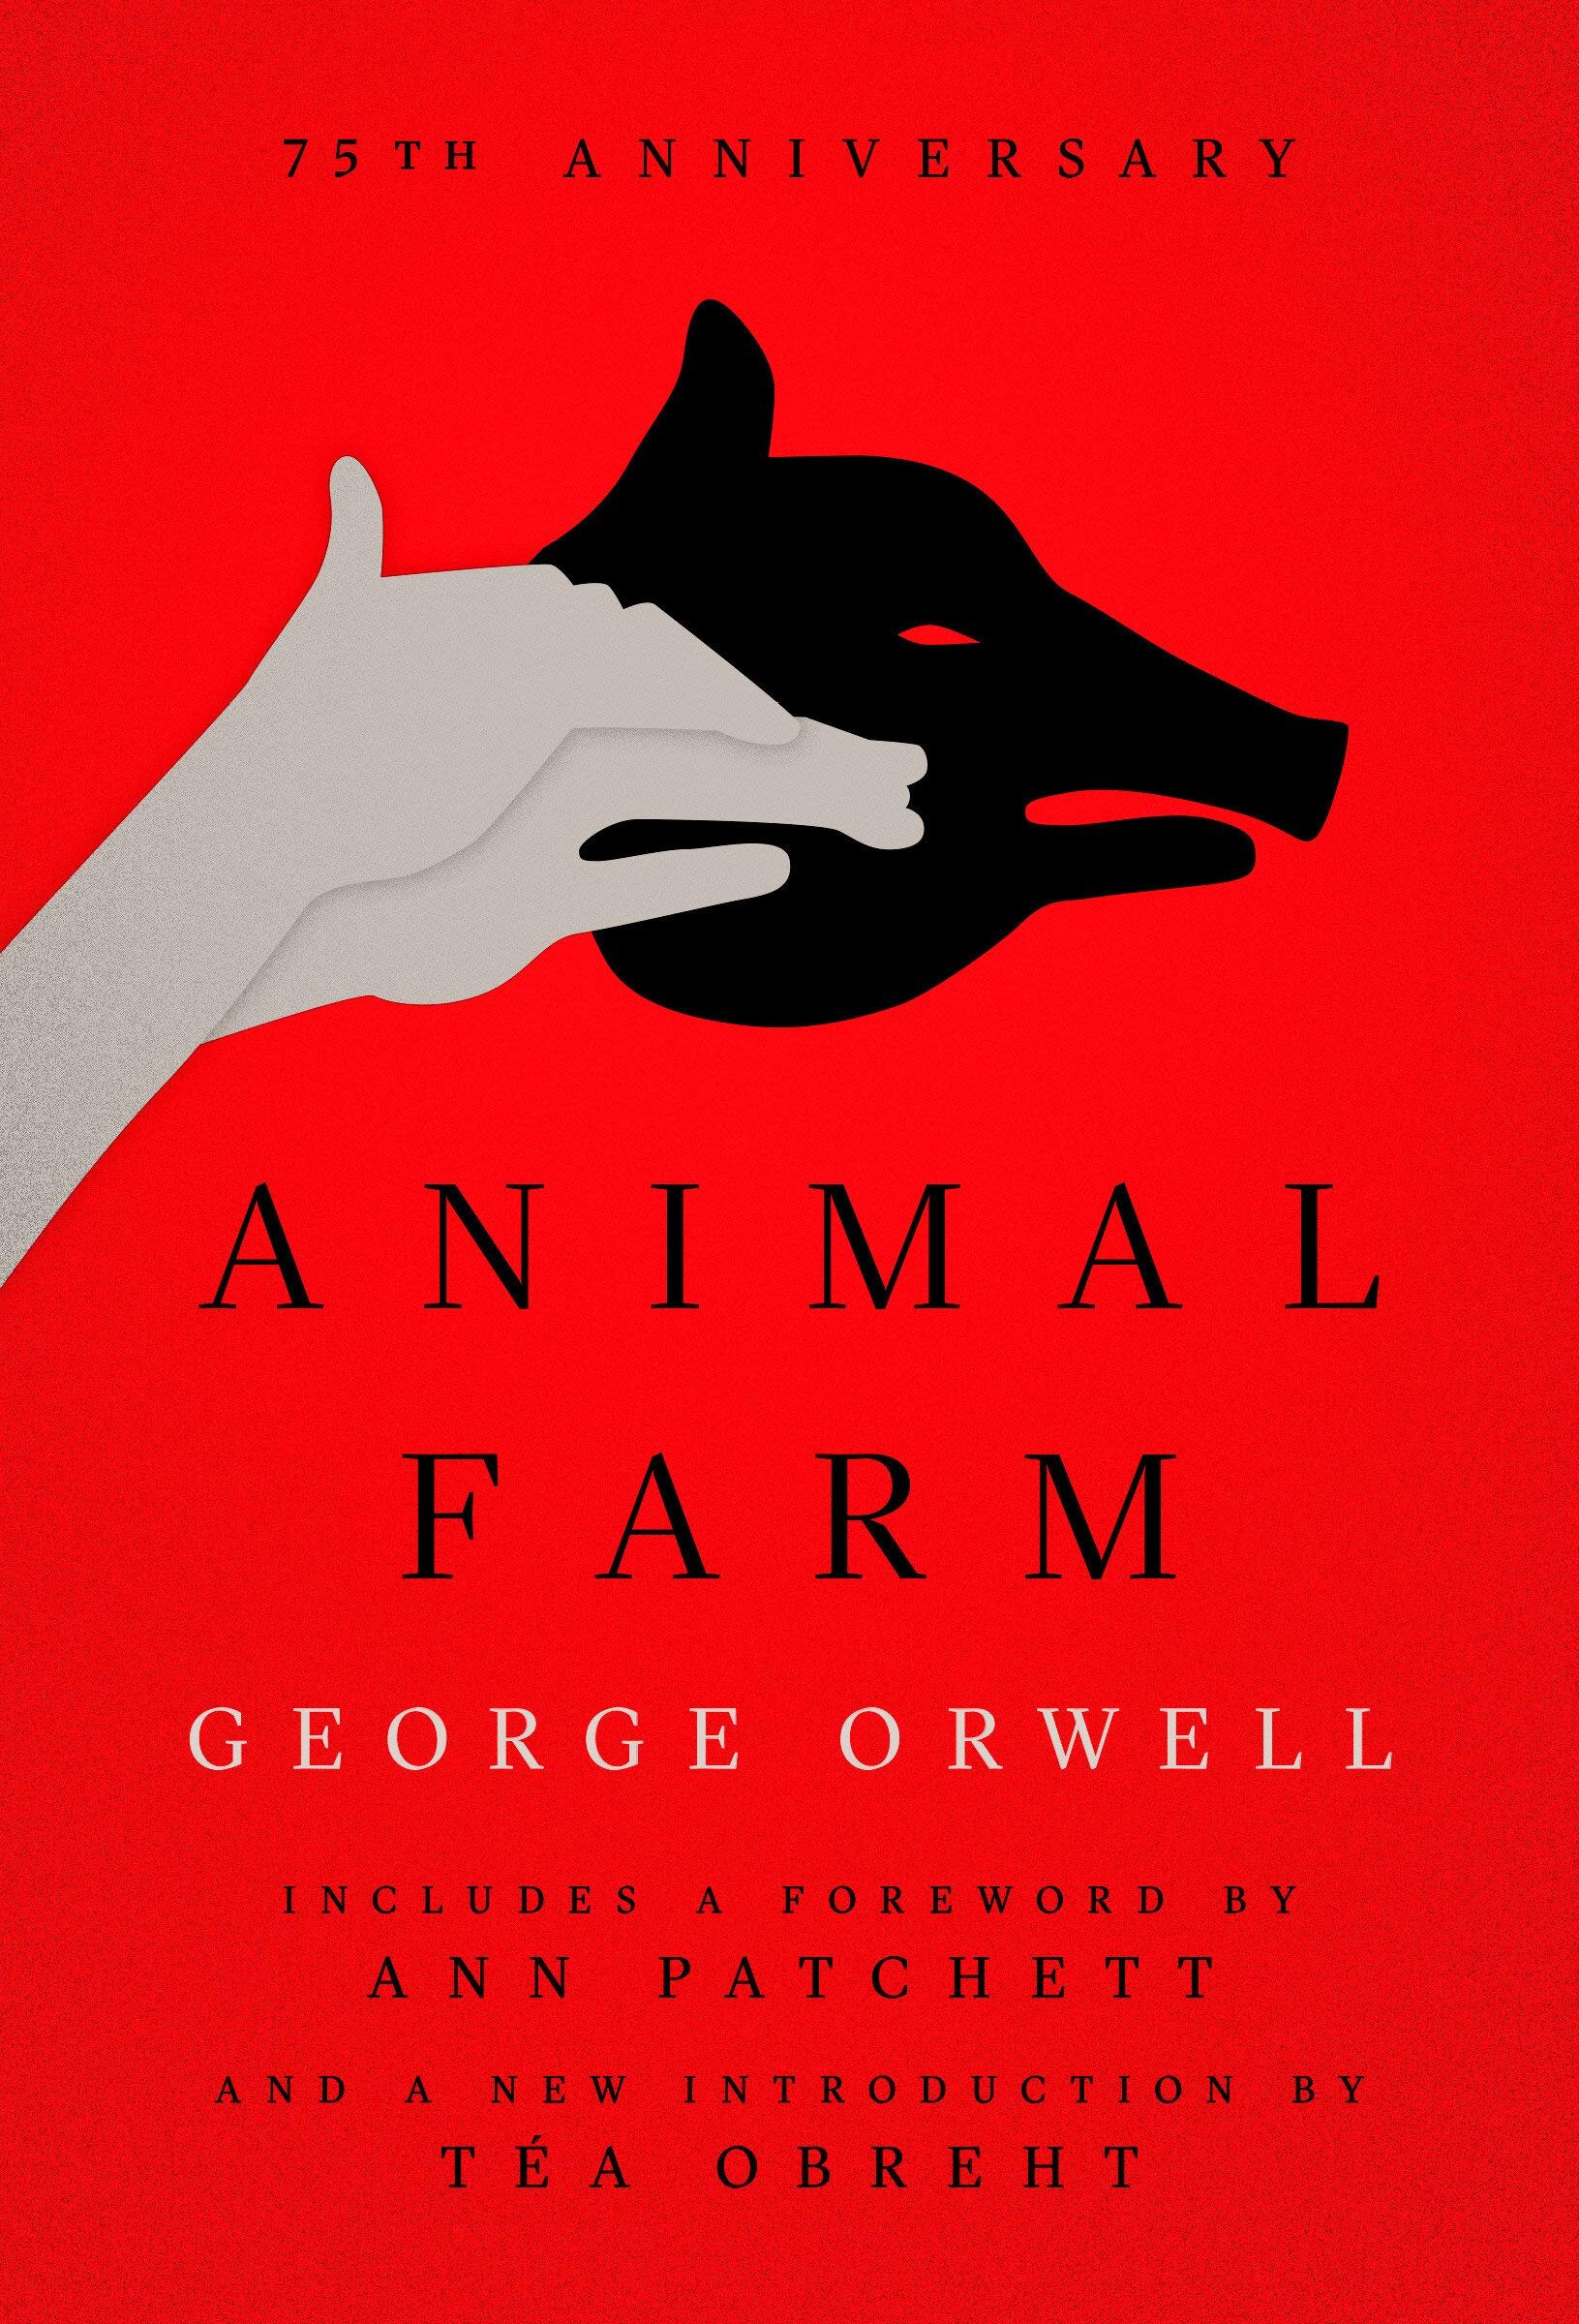 SPINE-George Orwell's Animal Farm gets Revamped for its 75th Anniversary